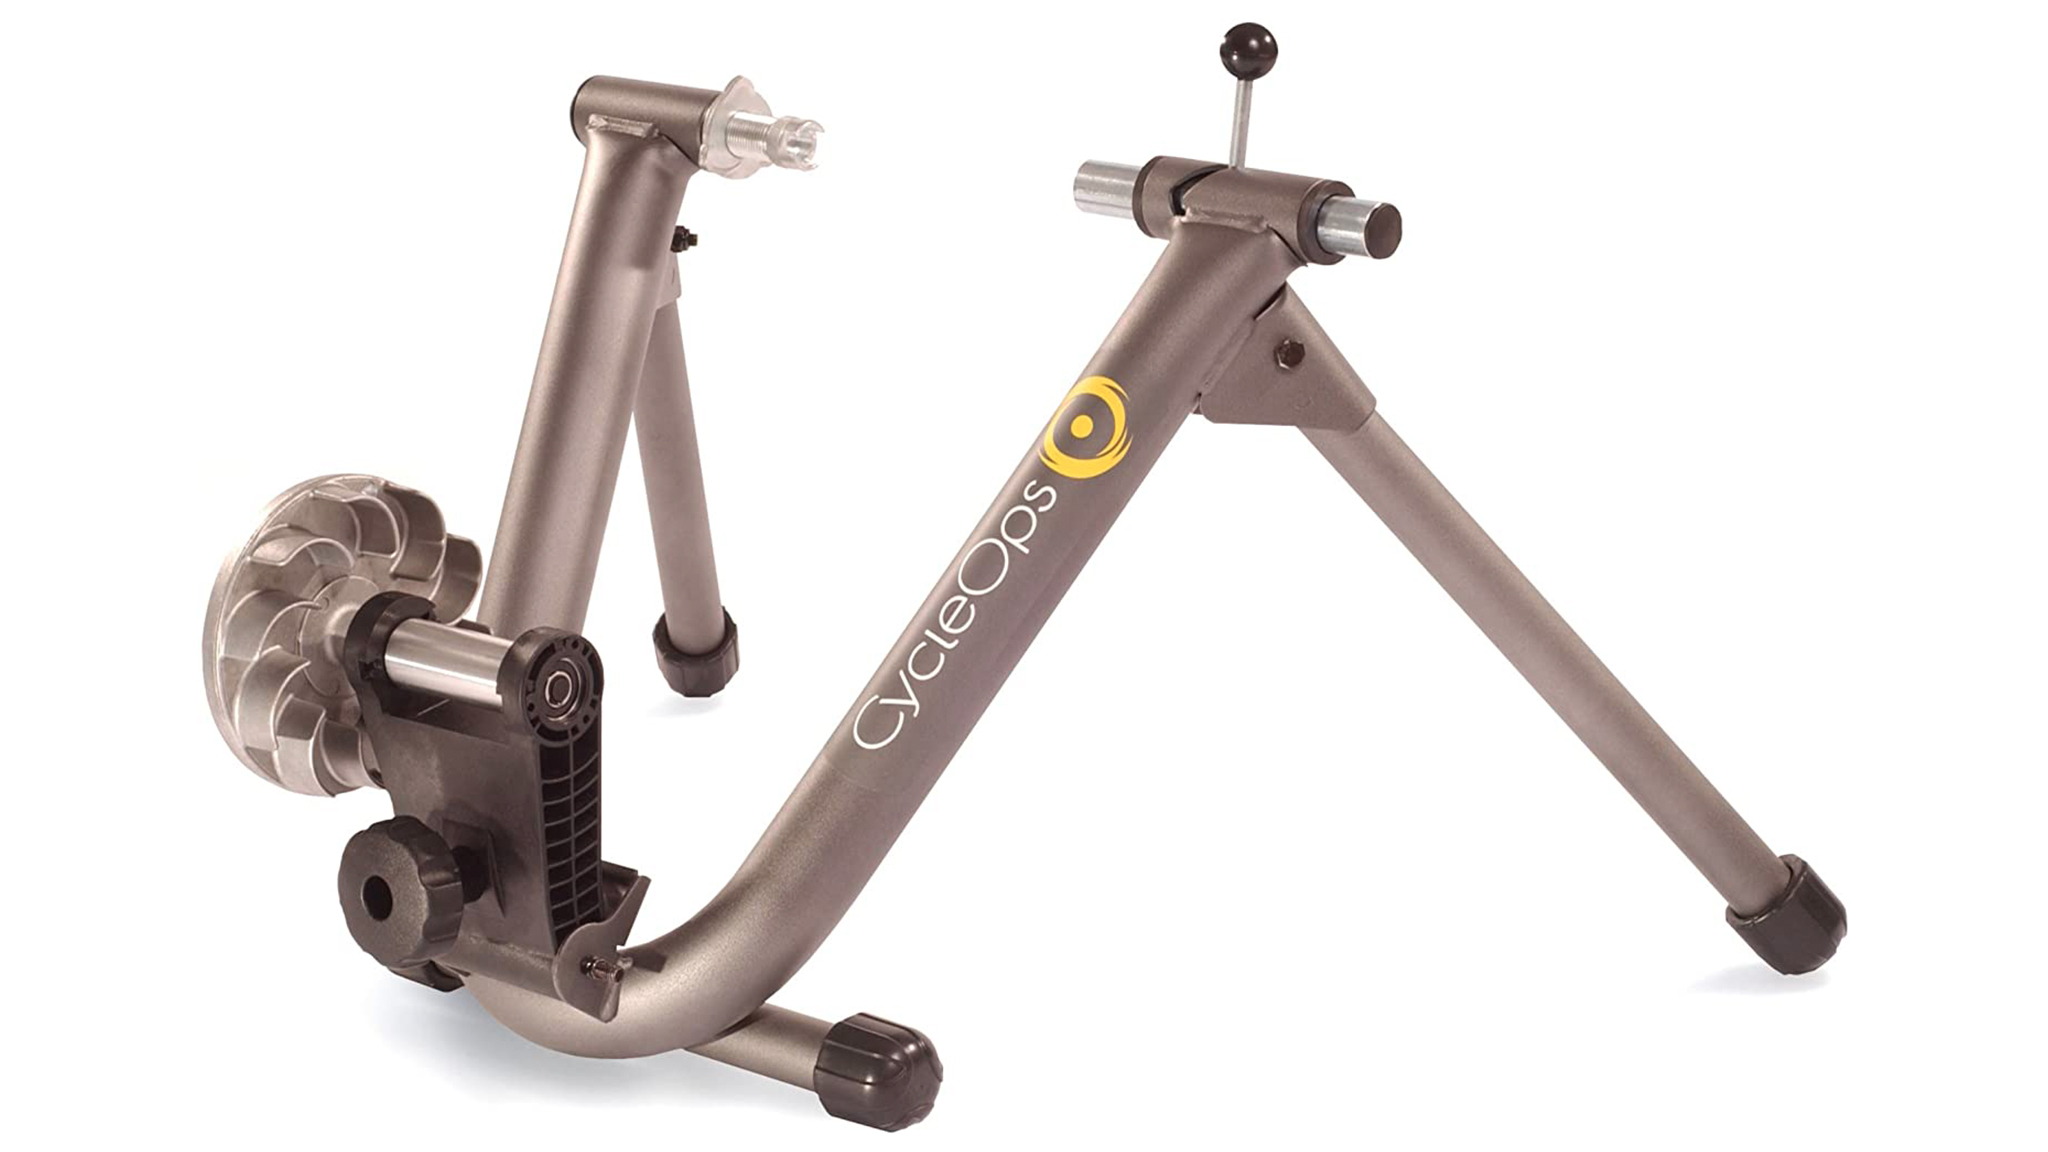 cycleops bicycle trainer